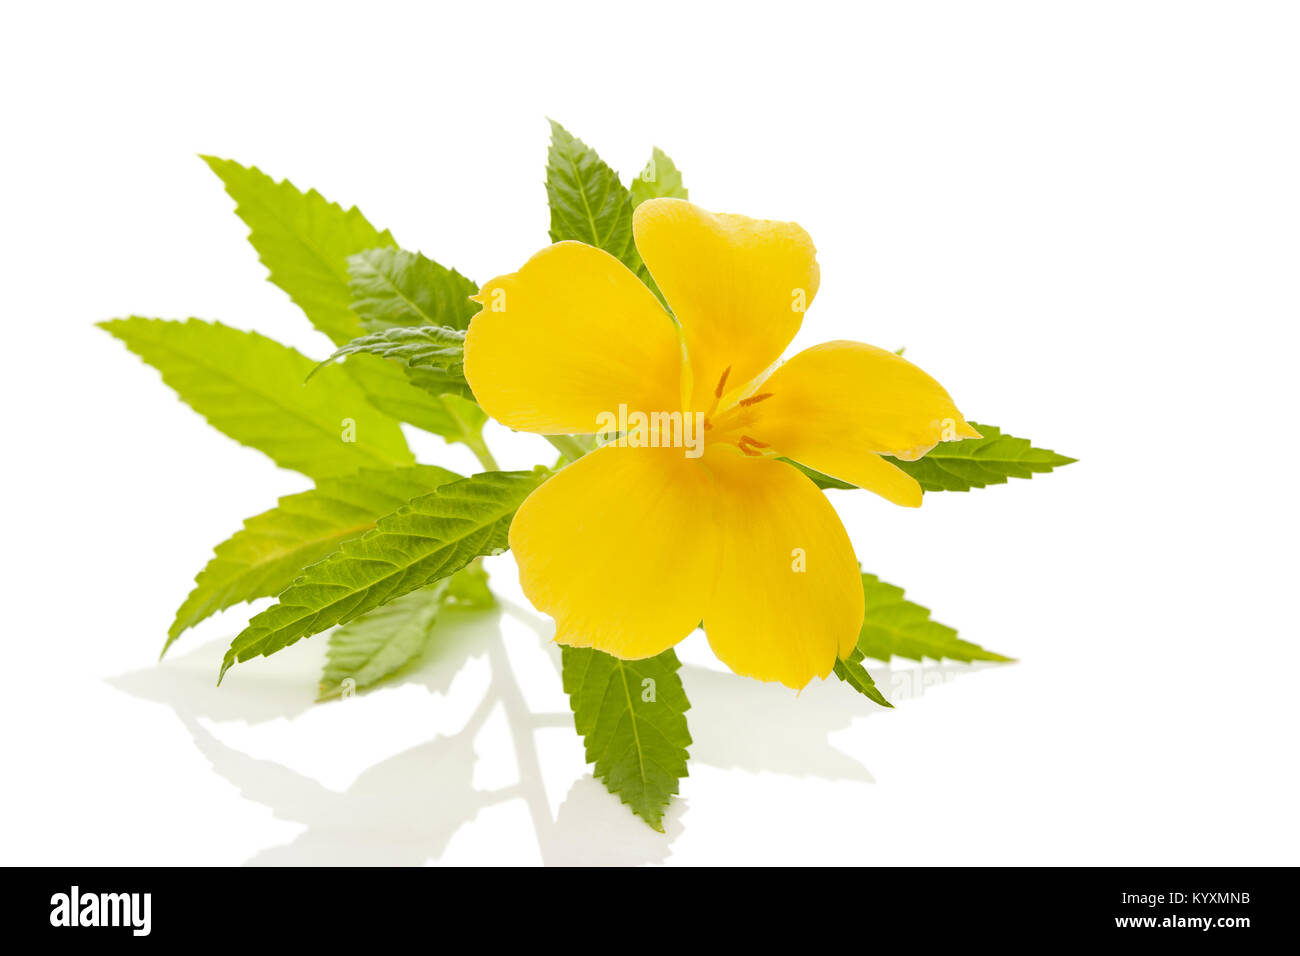 Damiana flower and leaves isolated on white background. Stock Photo